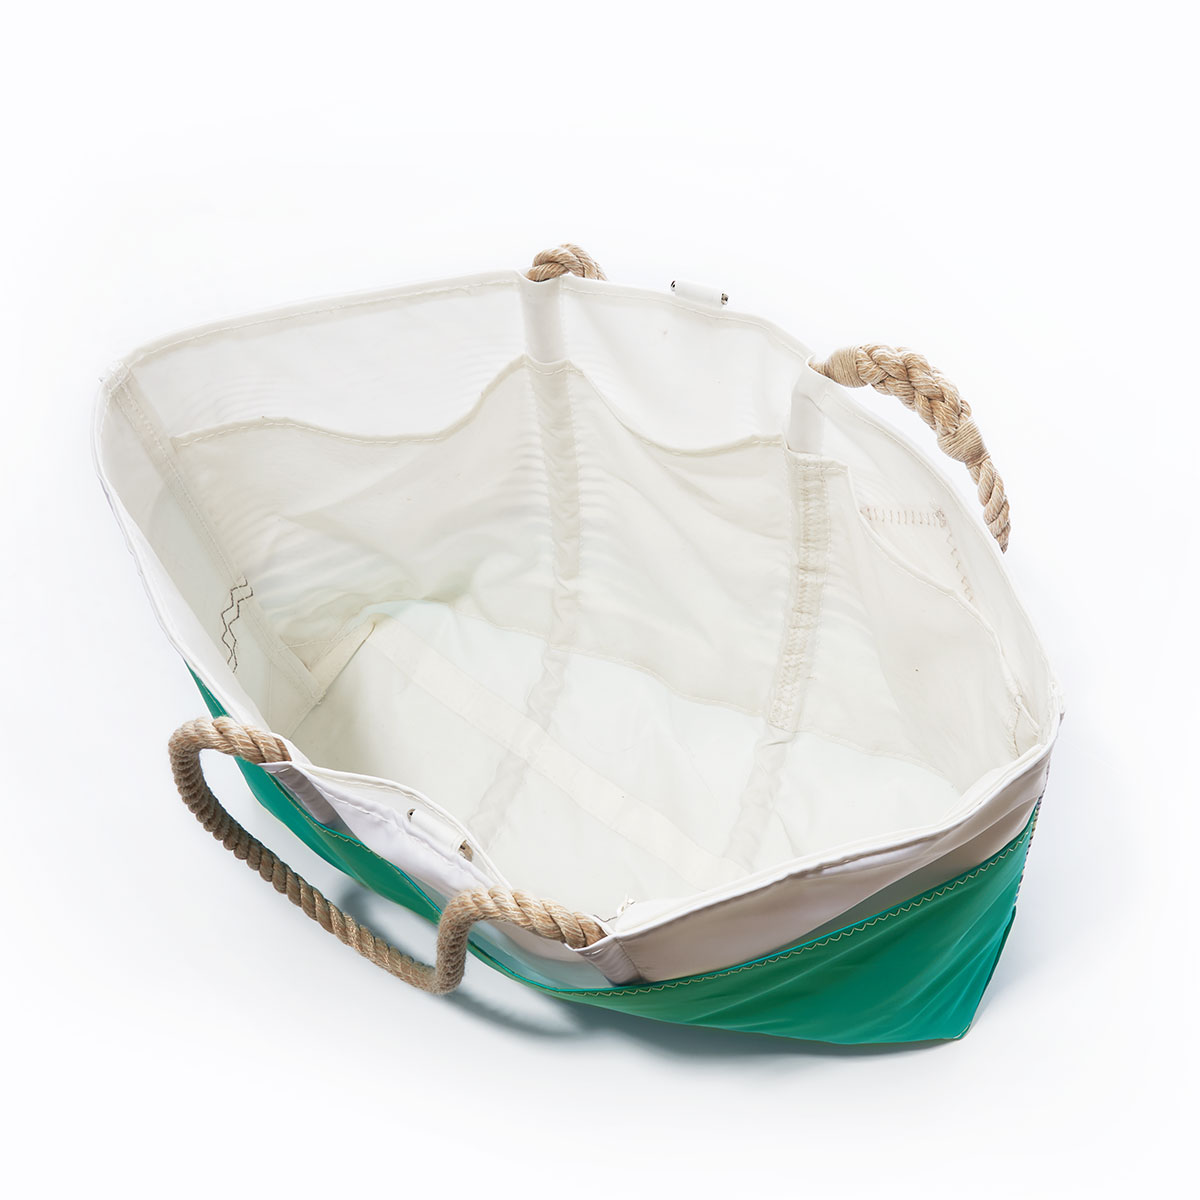 inside view of a recycled sail cloth beach tote with hemp rope handles is printed with ombre stripes of blue into green with a solid green bottom